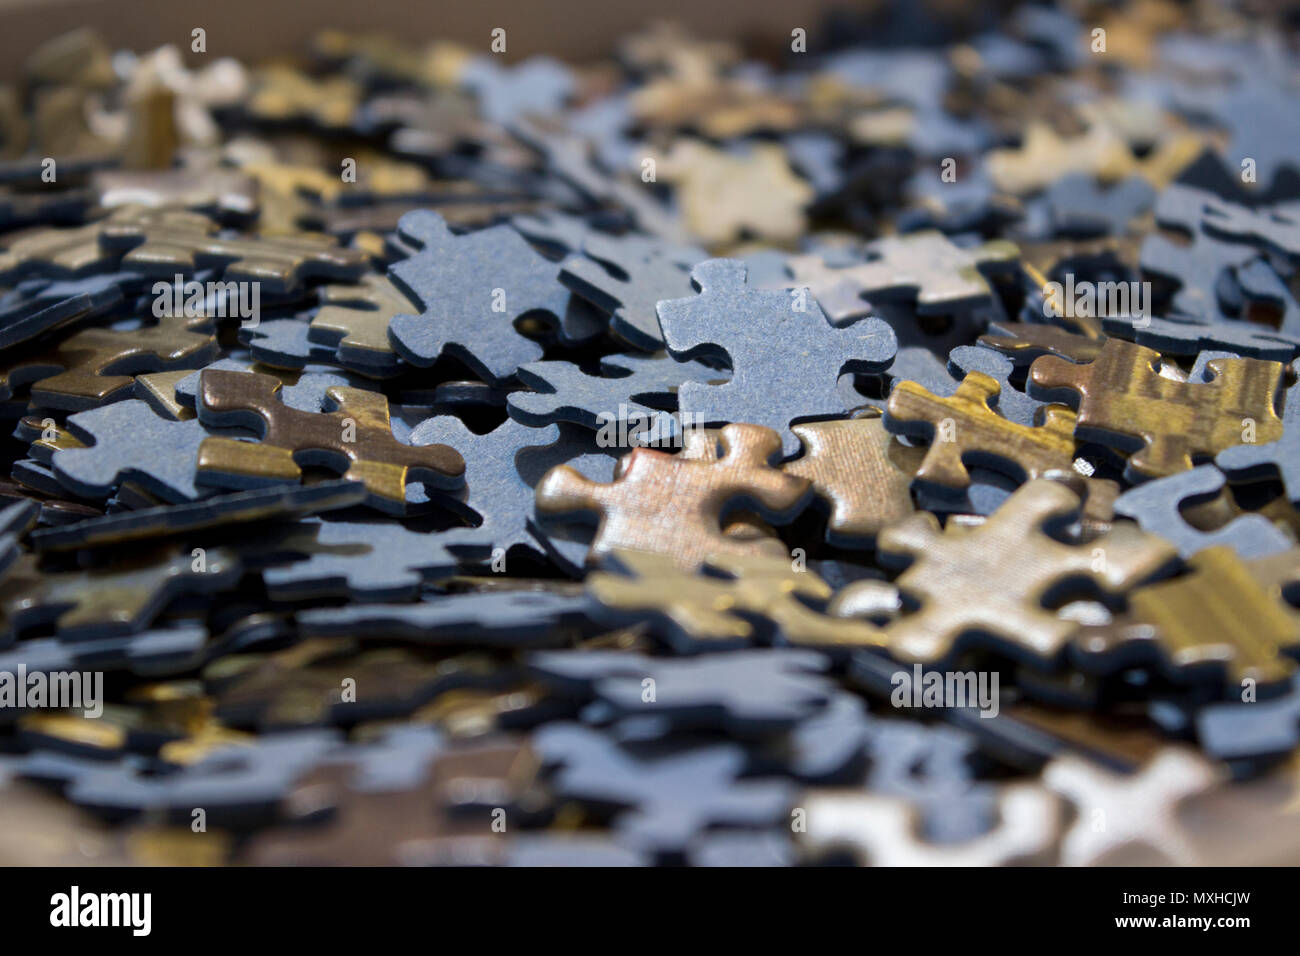 A closeup of Ravensburger brand Minecraft puzzle in a box on the wooden  surface Stock Photo - Alamy